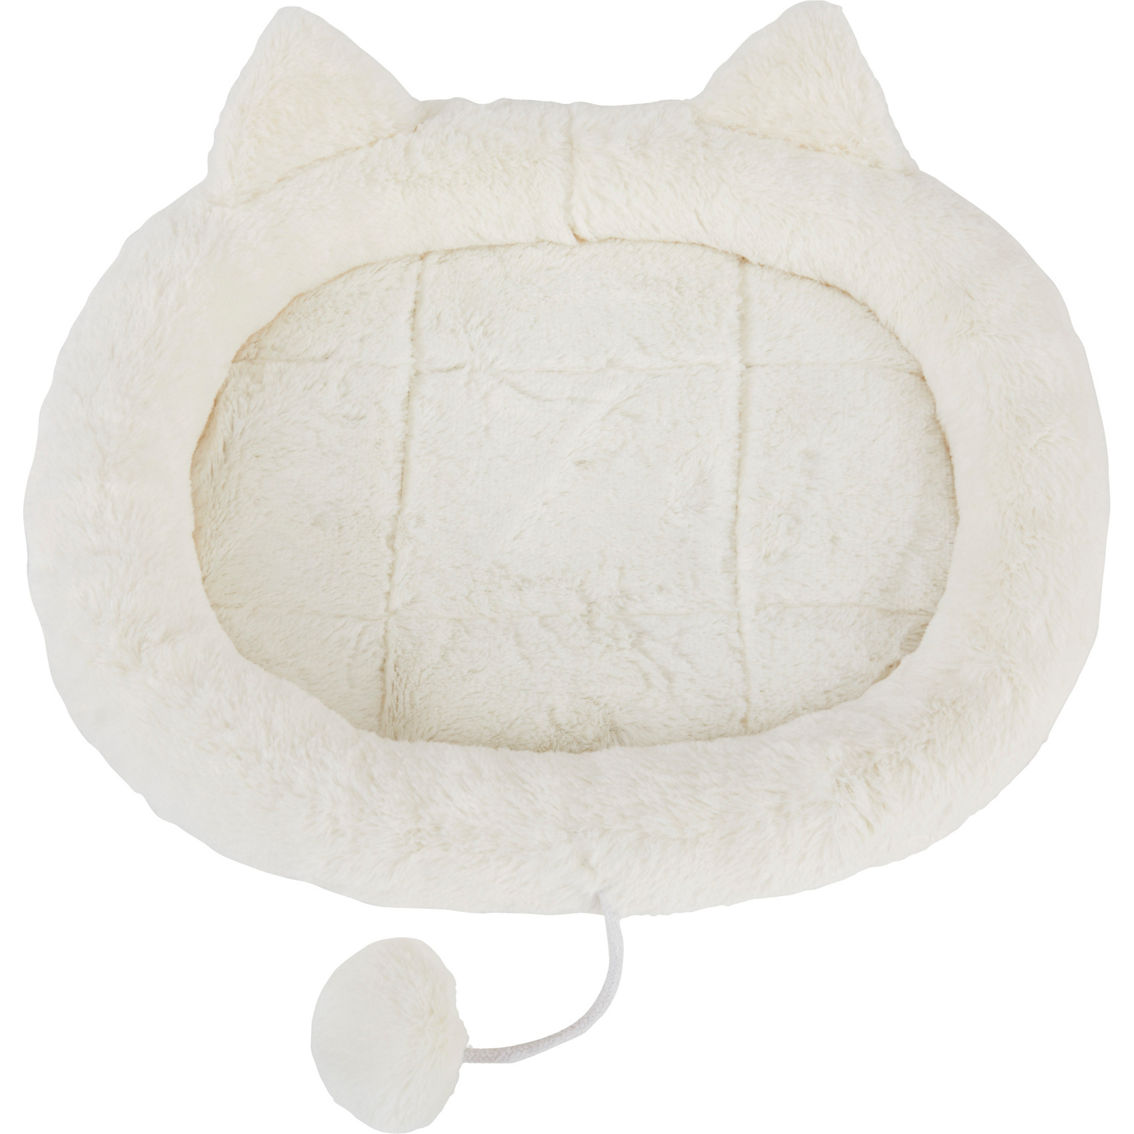 EveryYay Snooze Fest Ivory Cat Head Oval Snuggler Bed - Image 2 of 2